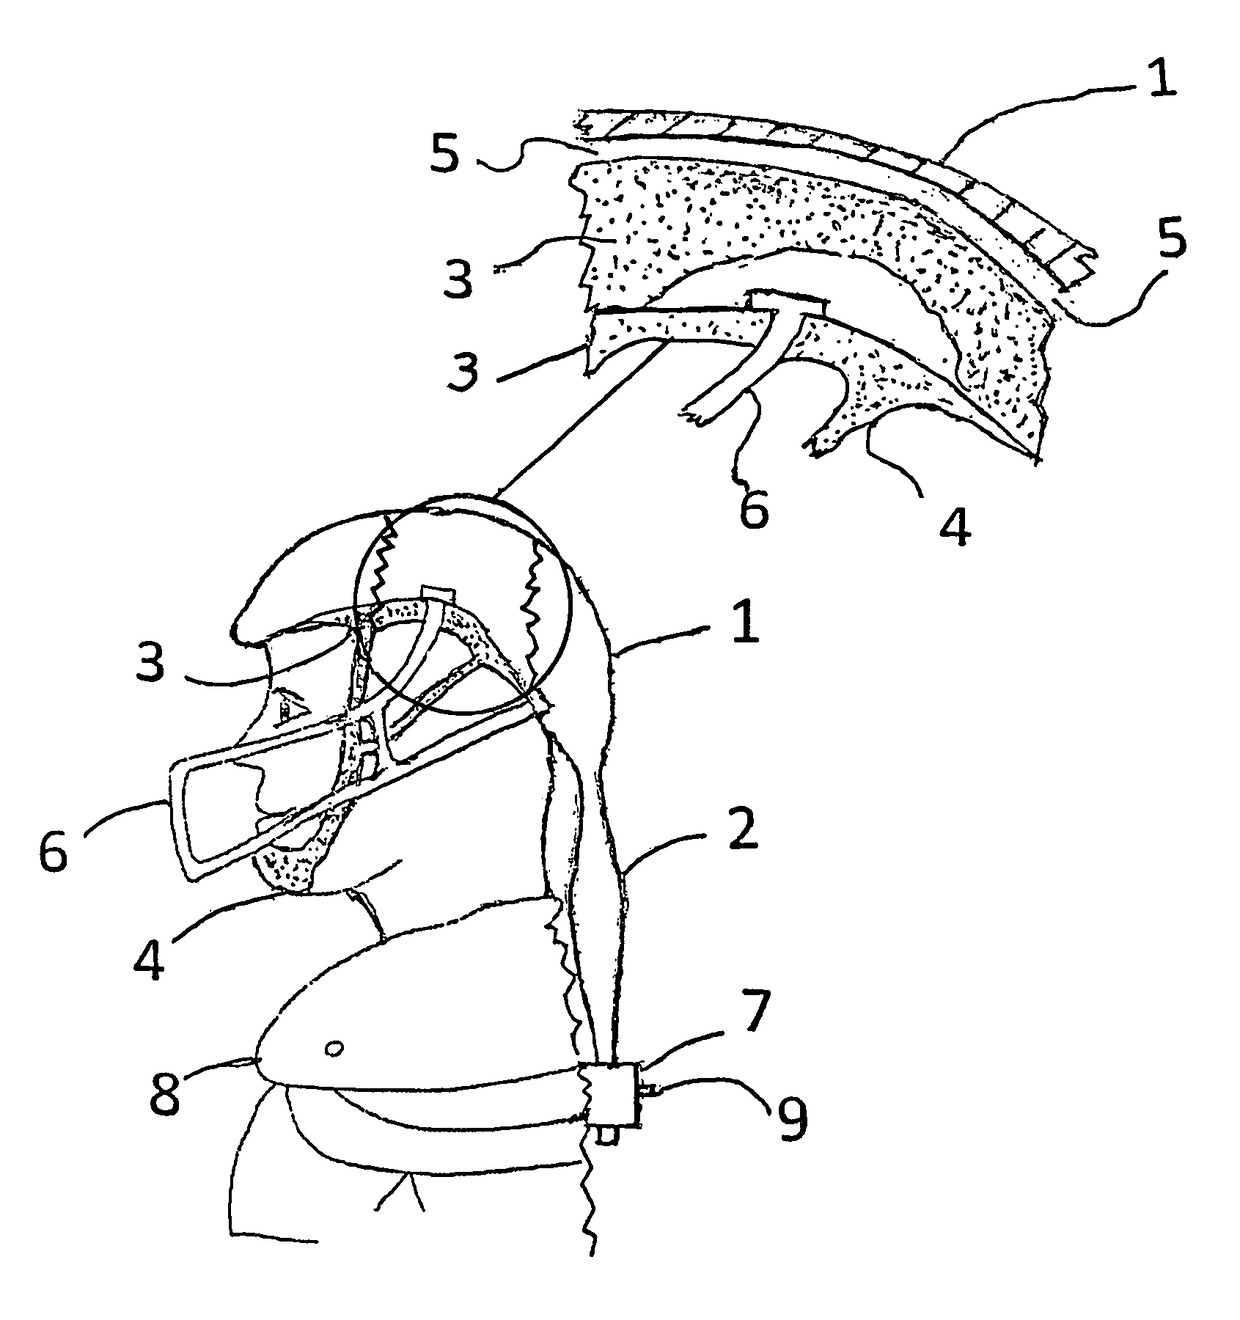 Helmet extension connected to shoulder pad to prevent brain and spine injuries